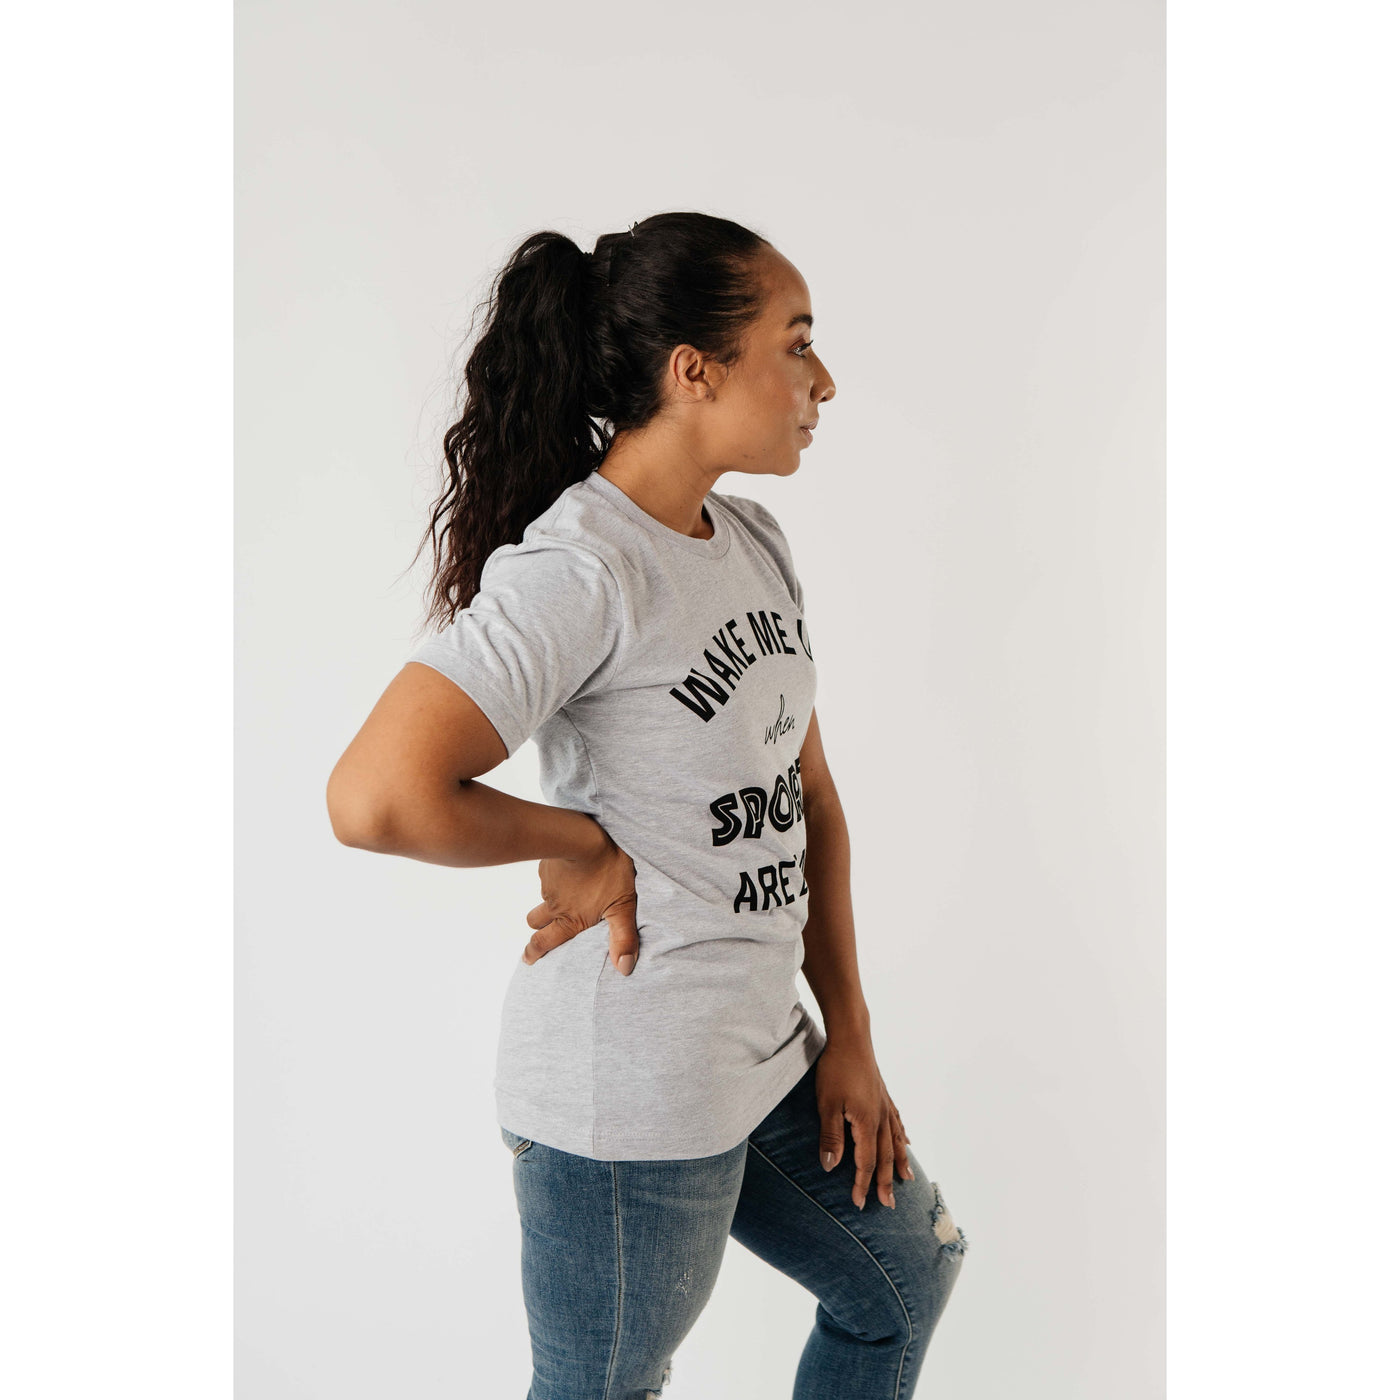 Wake Me Up When Sports Are Back Graphic Tee-W Top-Graceful & Chic Boutique, Family Clothing Store in Waxahachie, Texas